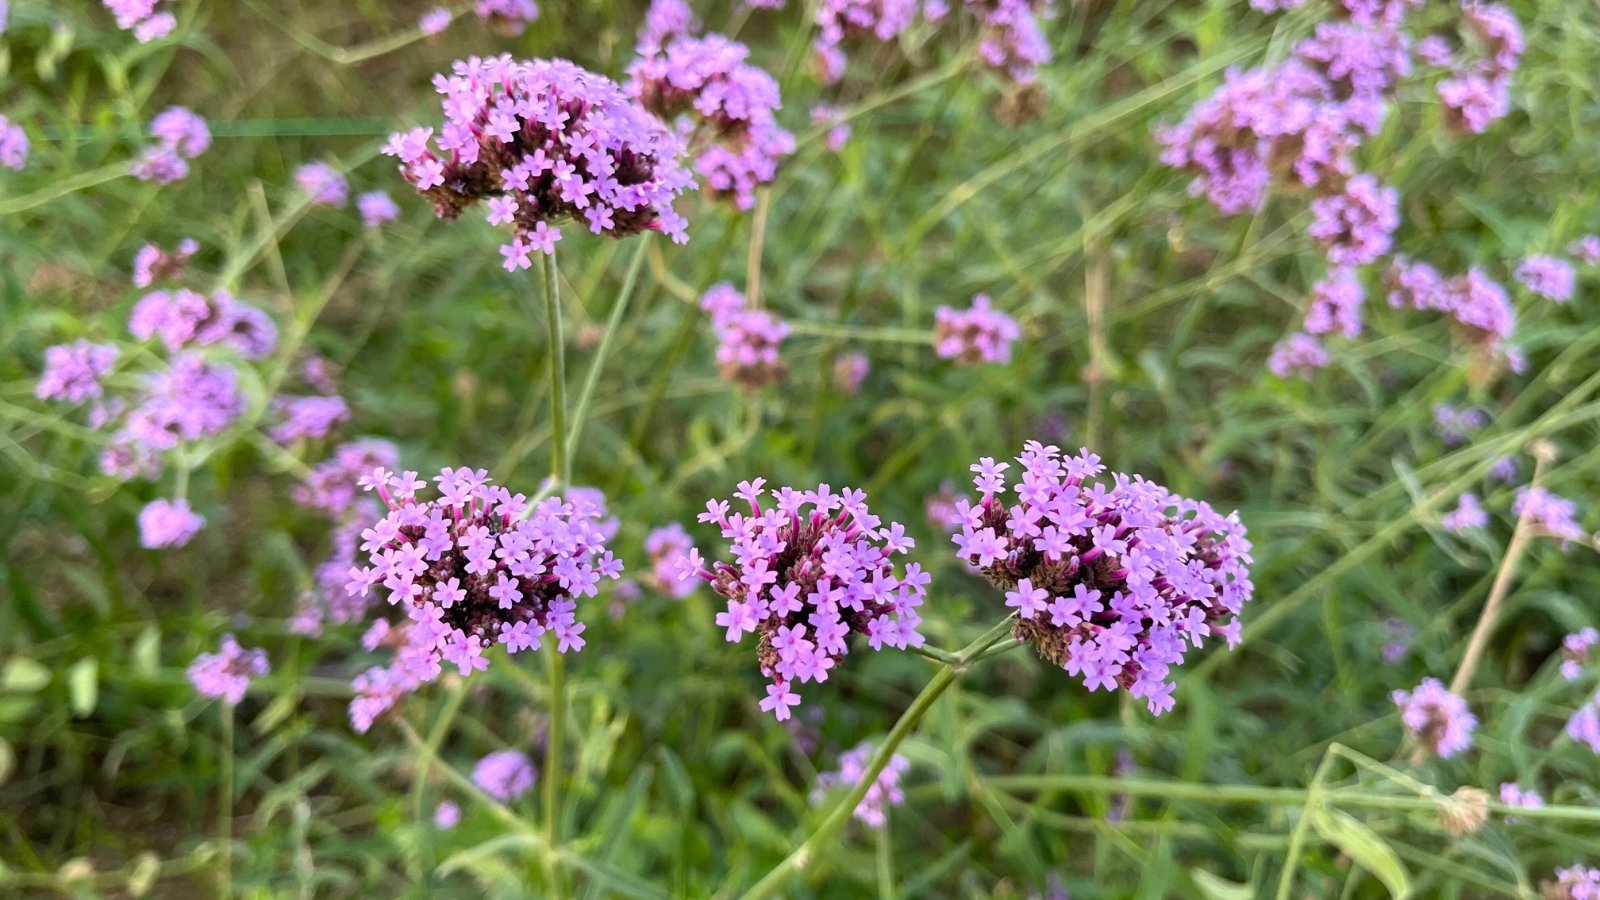 Verbena presents wiry stems and toothed leaves, adorned with clusters of small, fragrant flowers in shades of purple.
